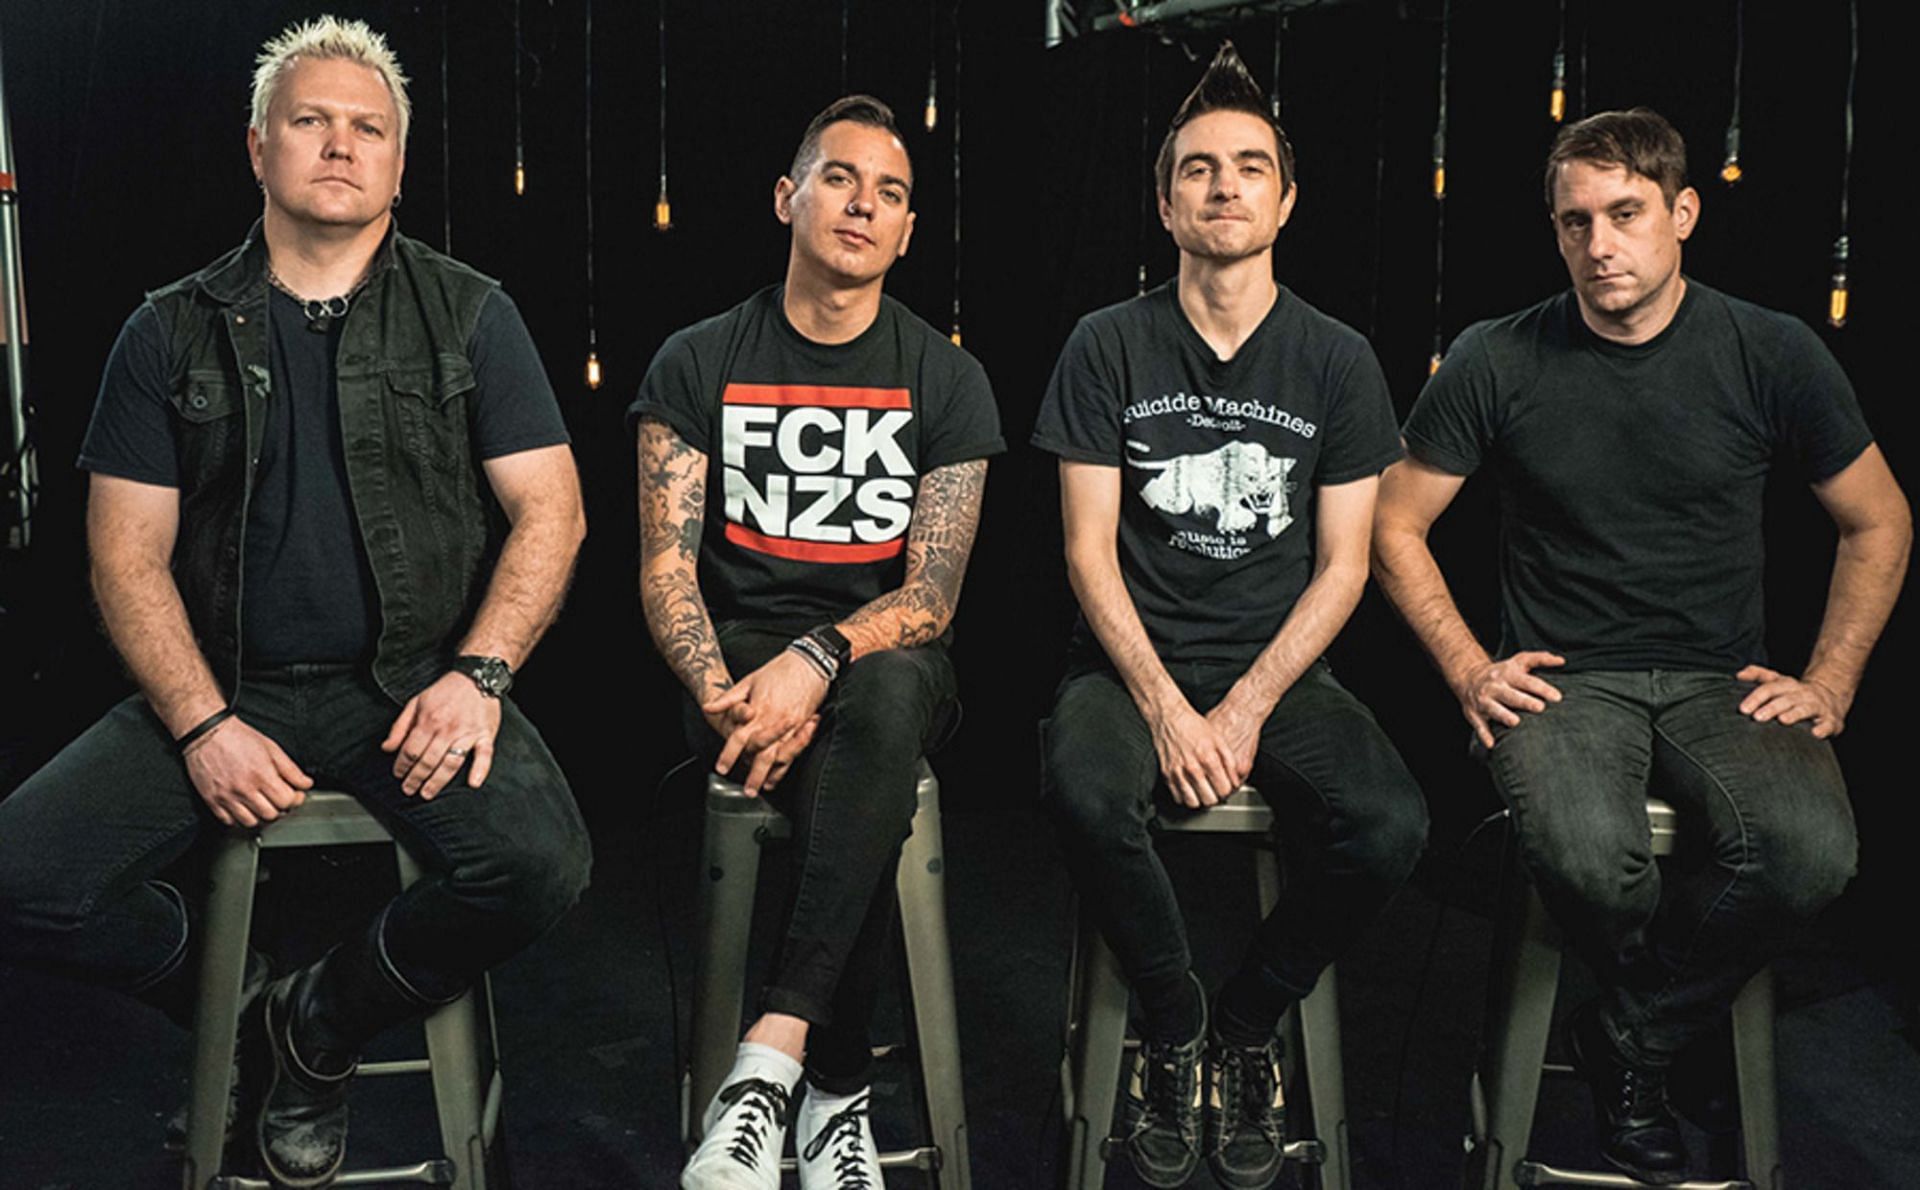 Anti Flag disbands after s*xual assault allegations allegedly against the lead singer come to light (Image via Setlist.fm) 